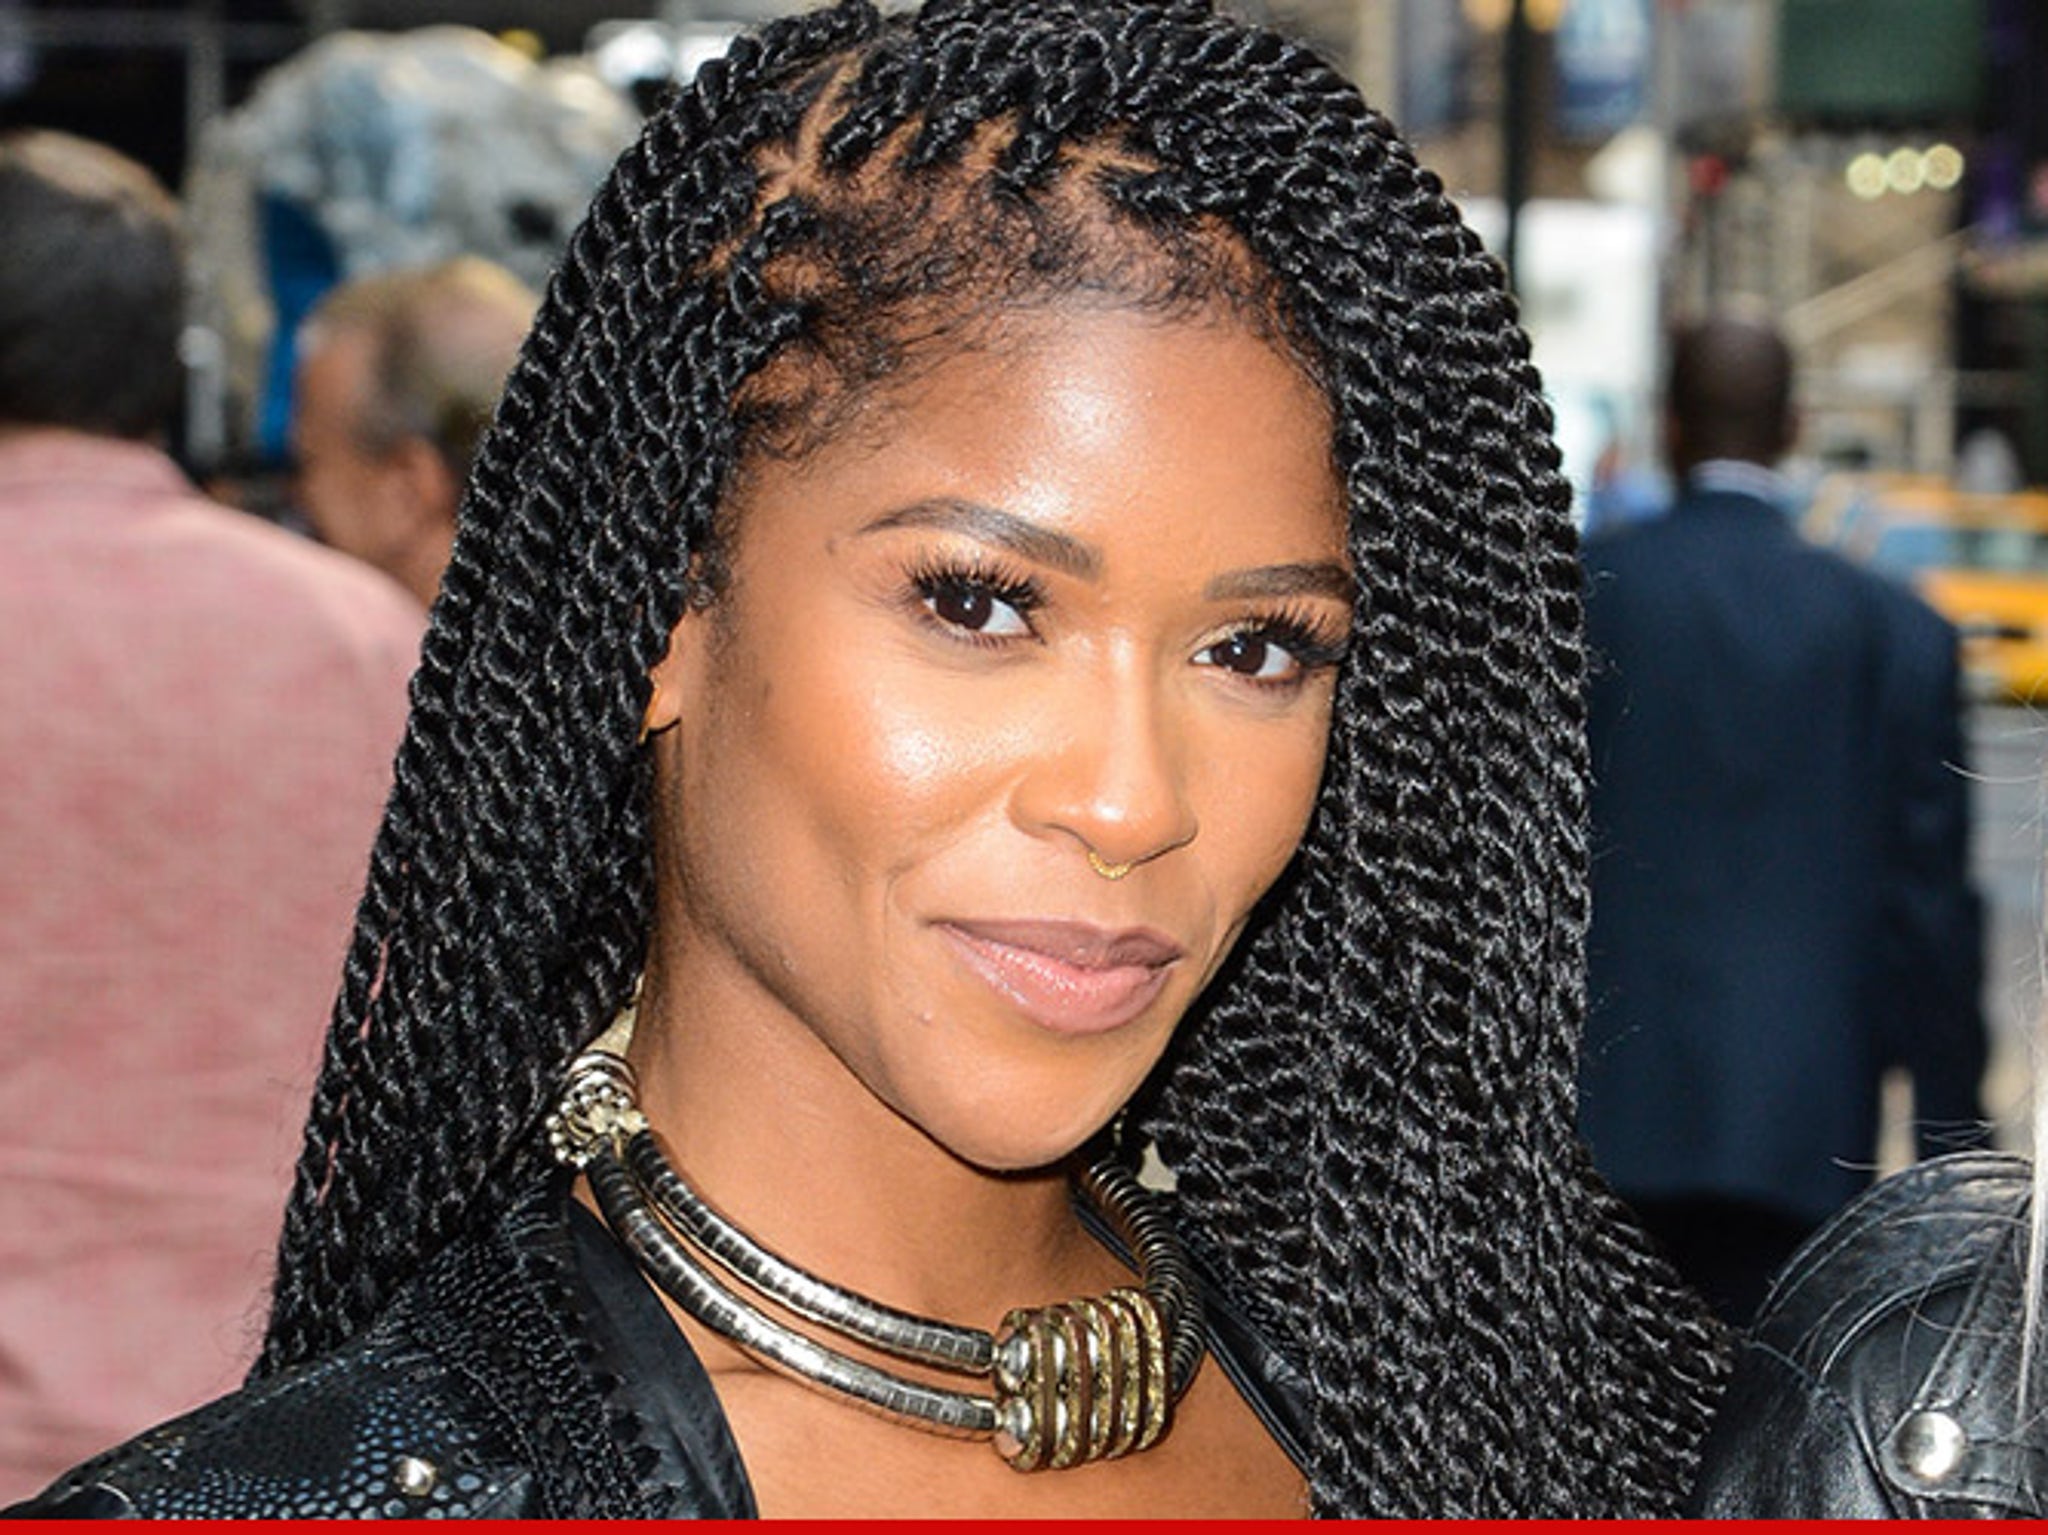 X Factor Star Dead Singer Simone Battle From G R L Dies At 25 From Apparent Suicide